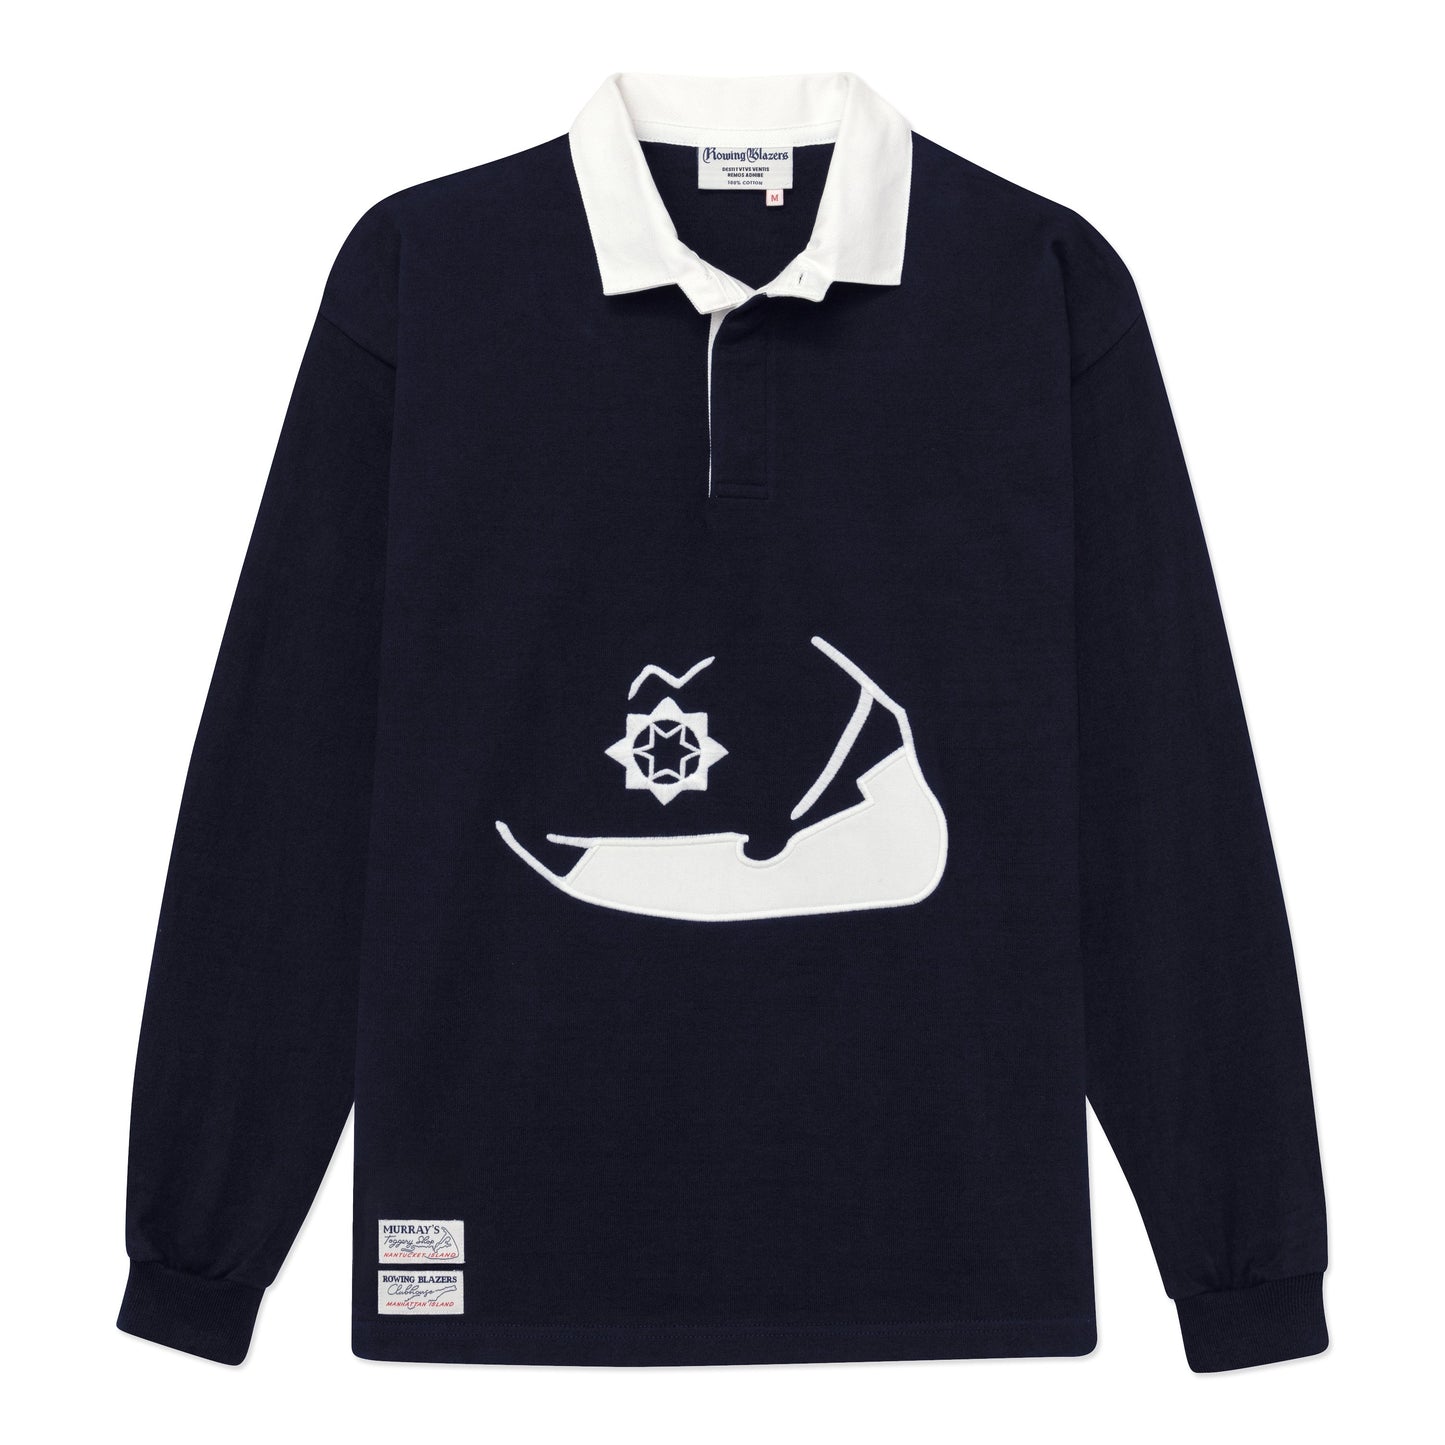 Rowing Blazers X Murray's Toggery Navy Rugby